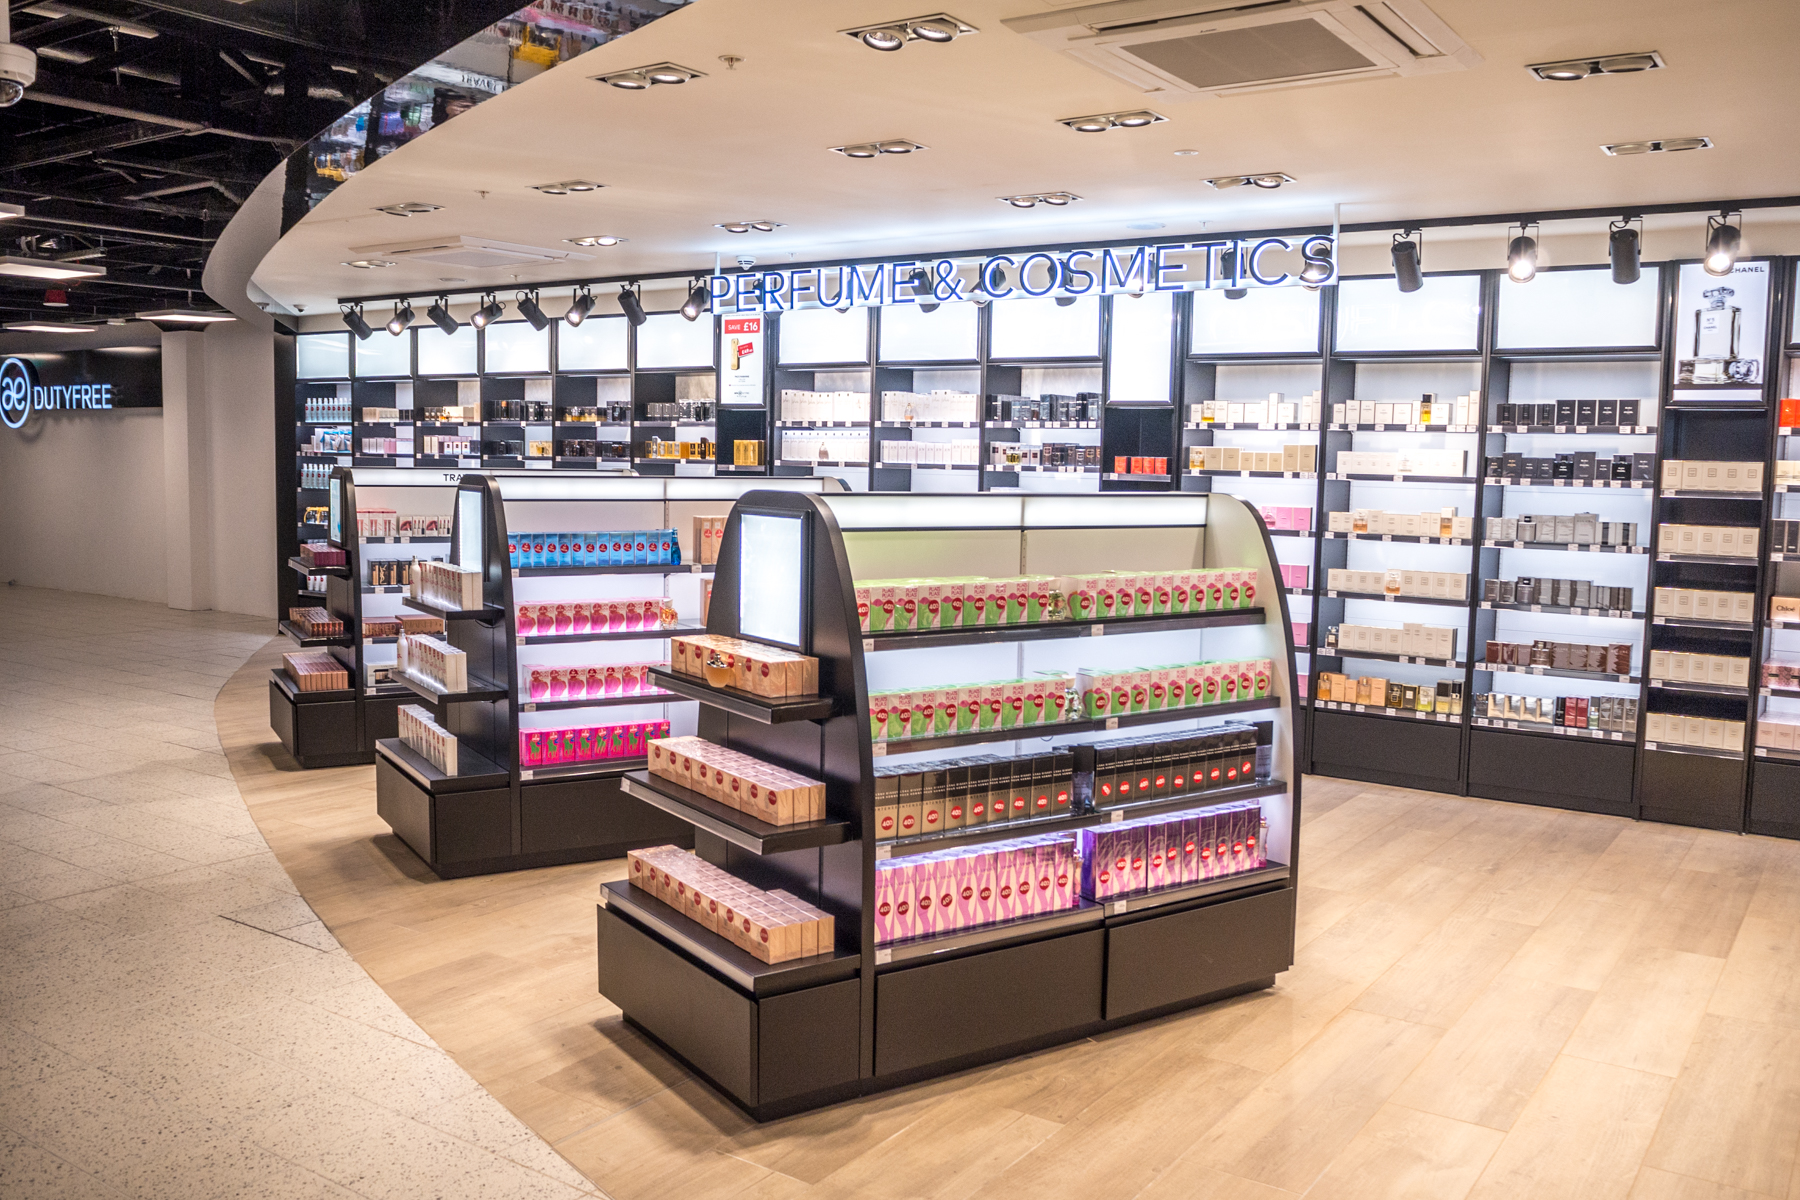 luton airport retail fit-out Woods Hardwick lagardere